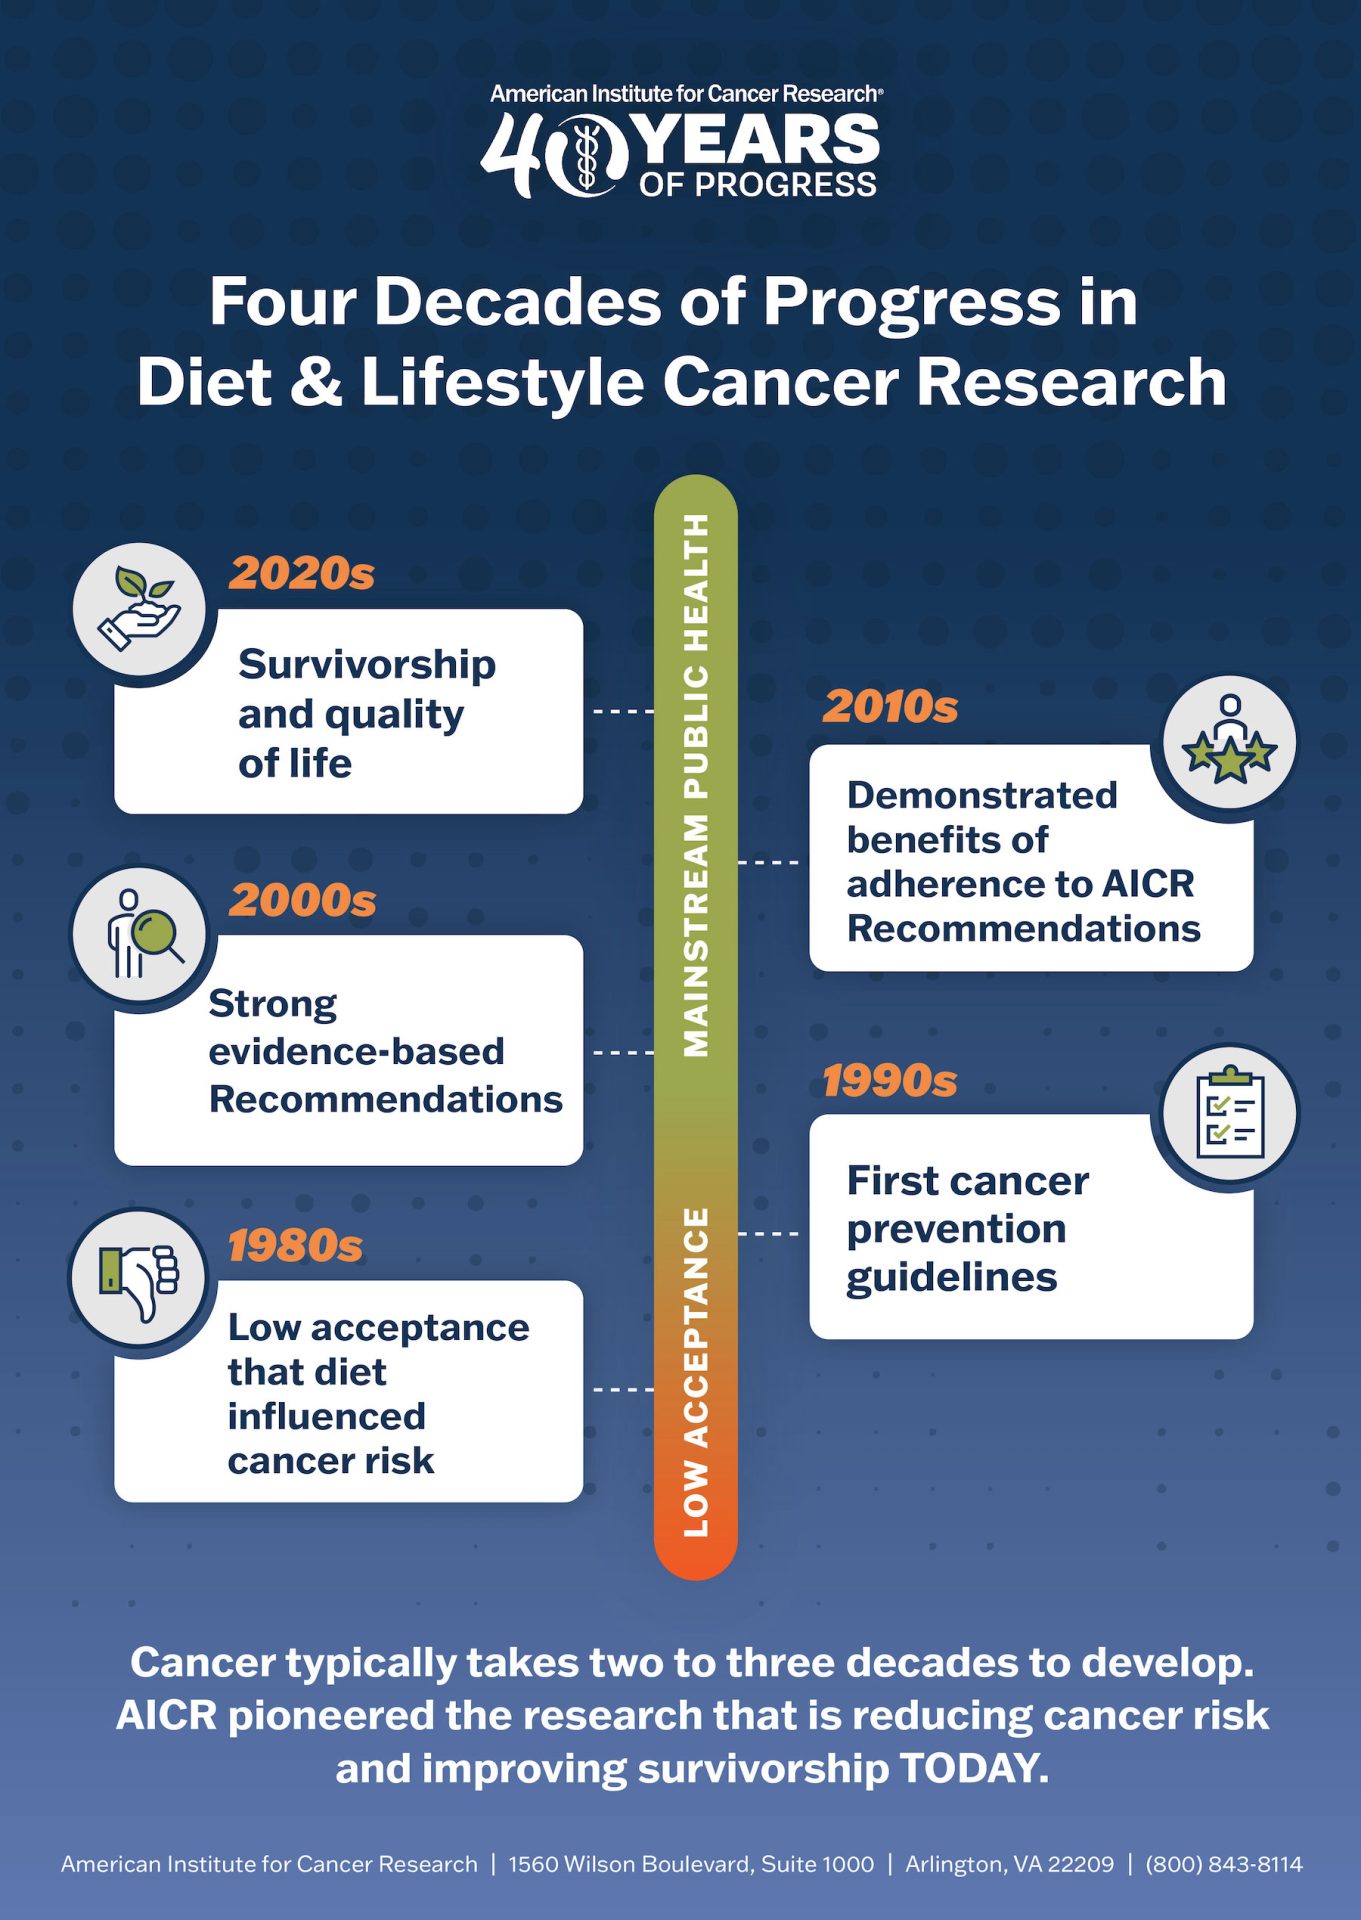 Diet and lifestyle choices for cancer prevention